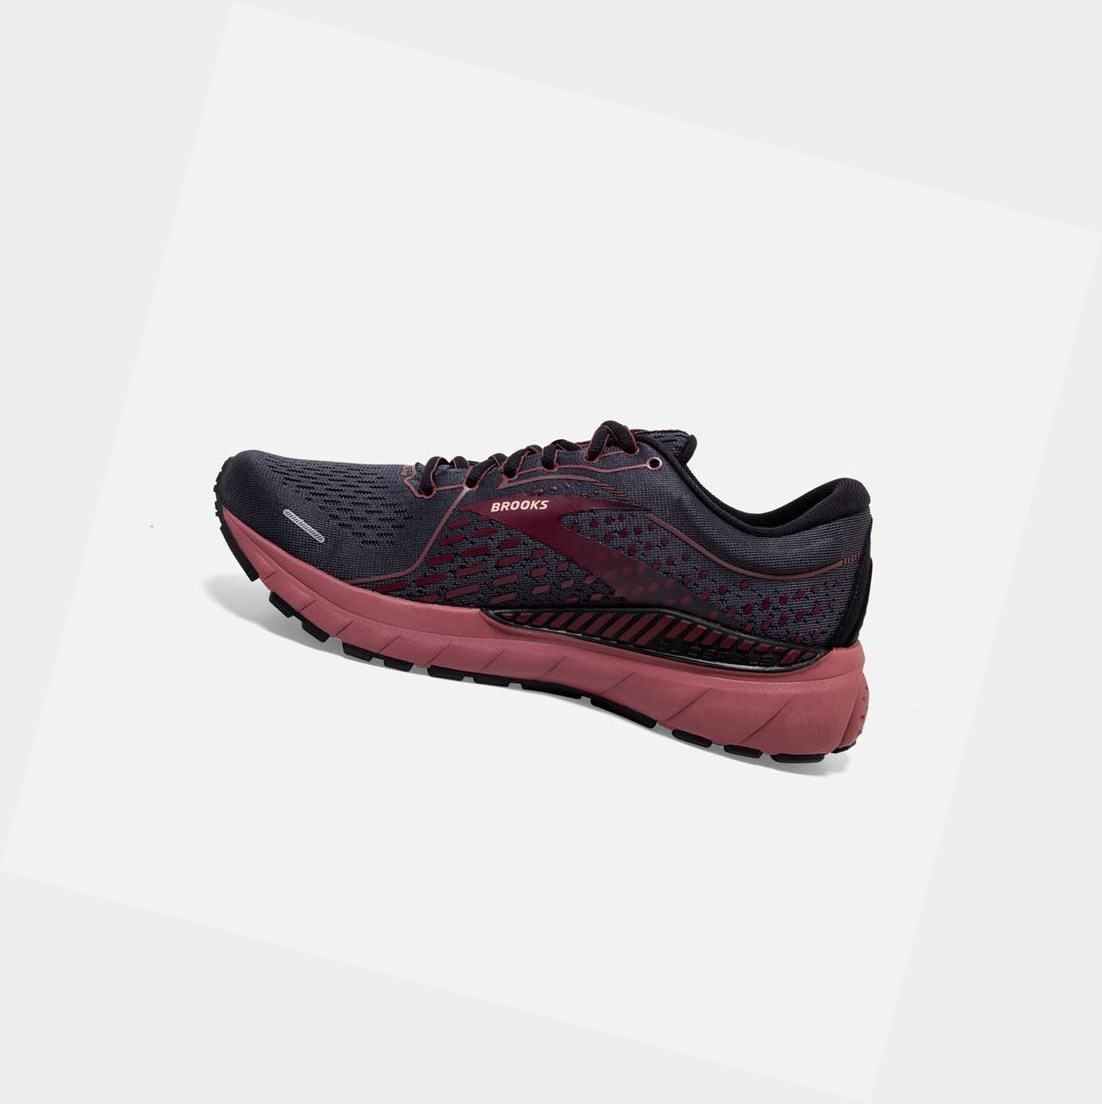 Brooks Adrenaline GTS 21 Women's Road Running Shoes Black / Blackened Pearl / Nocturne | TLRX-30529